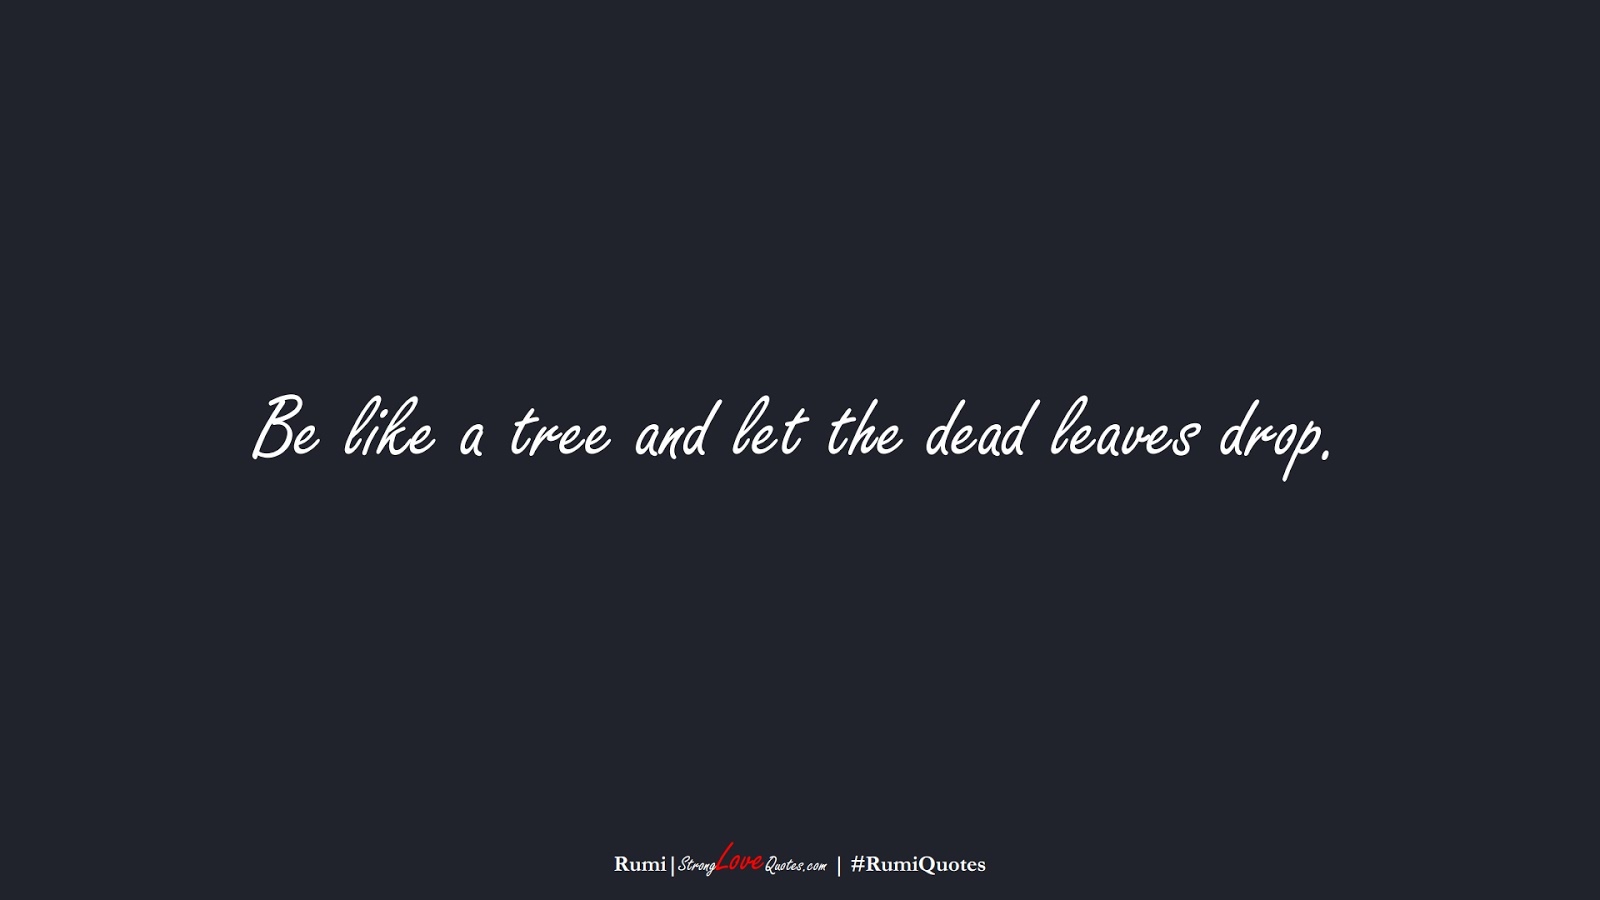 Be like a tree and let the dead leaves drop. (Rumi);  #RumiQuotes